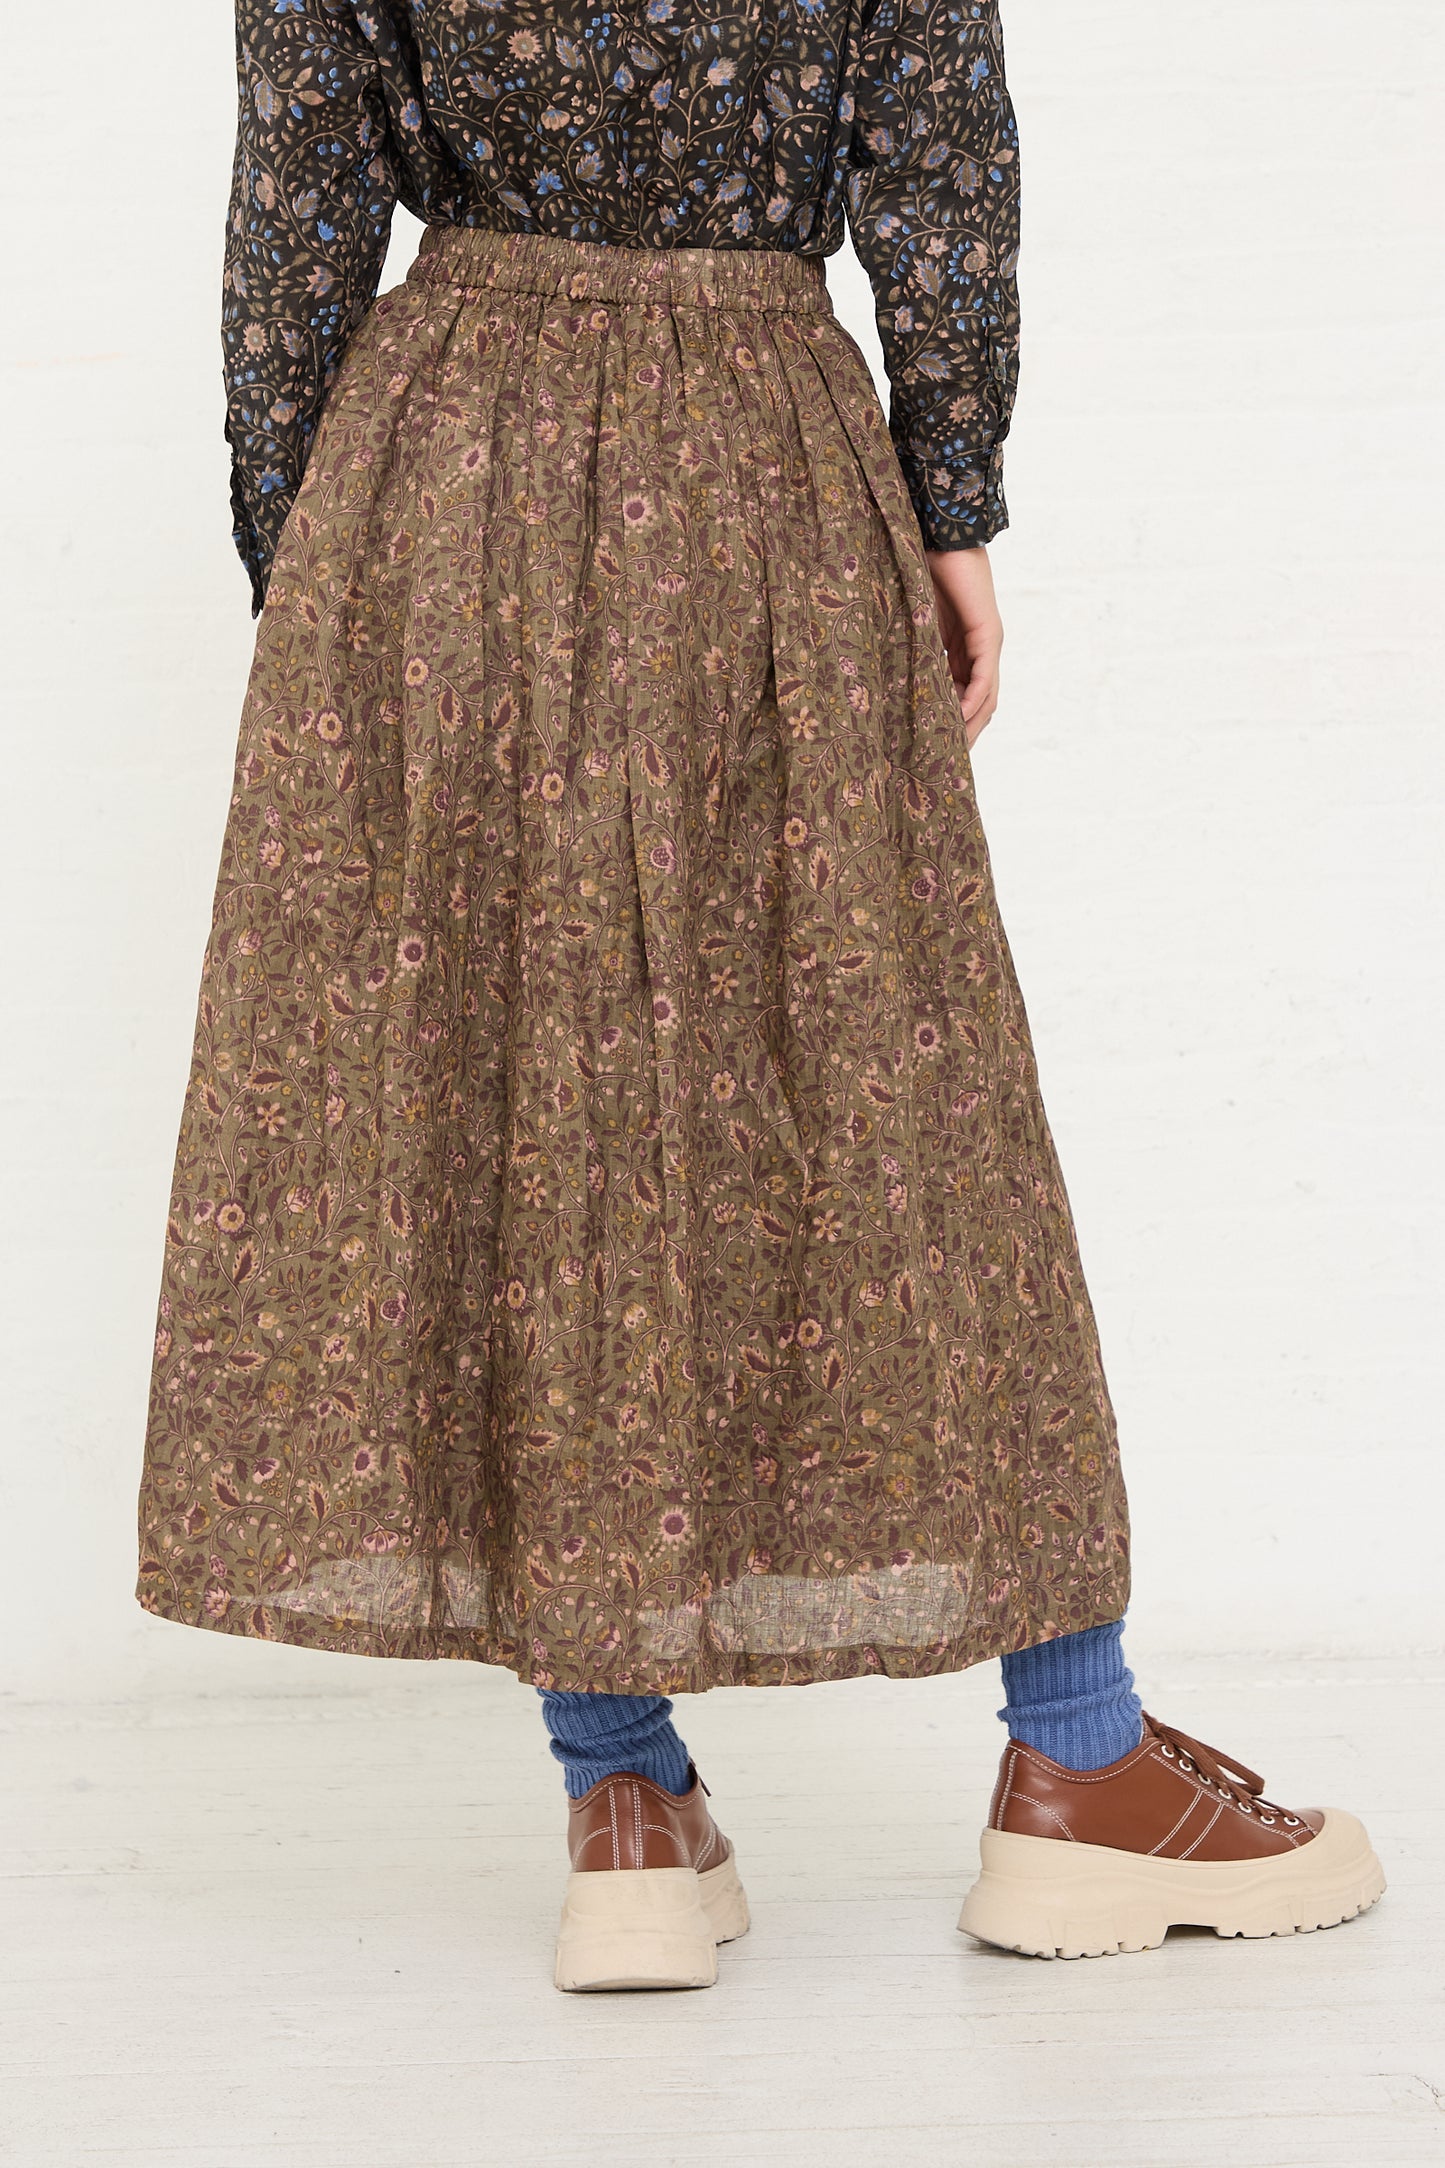 Woman wearing an Ichi Antiquités Linen Floral Skirt in Mocha with a lace top, patterned socks, and chunky sole shoes.